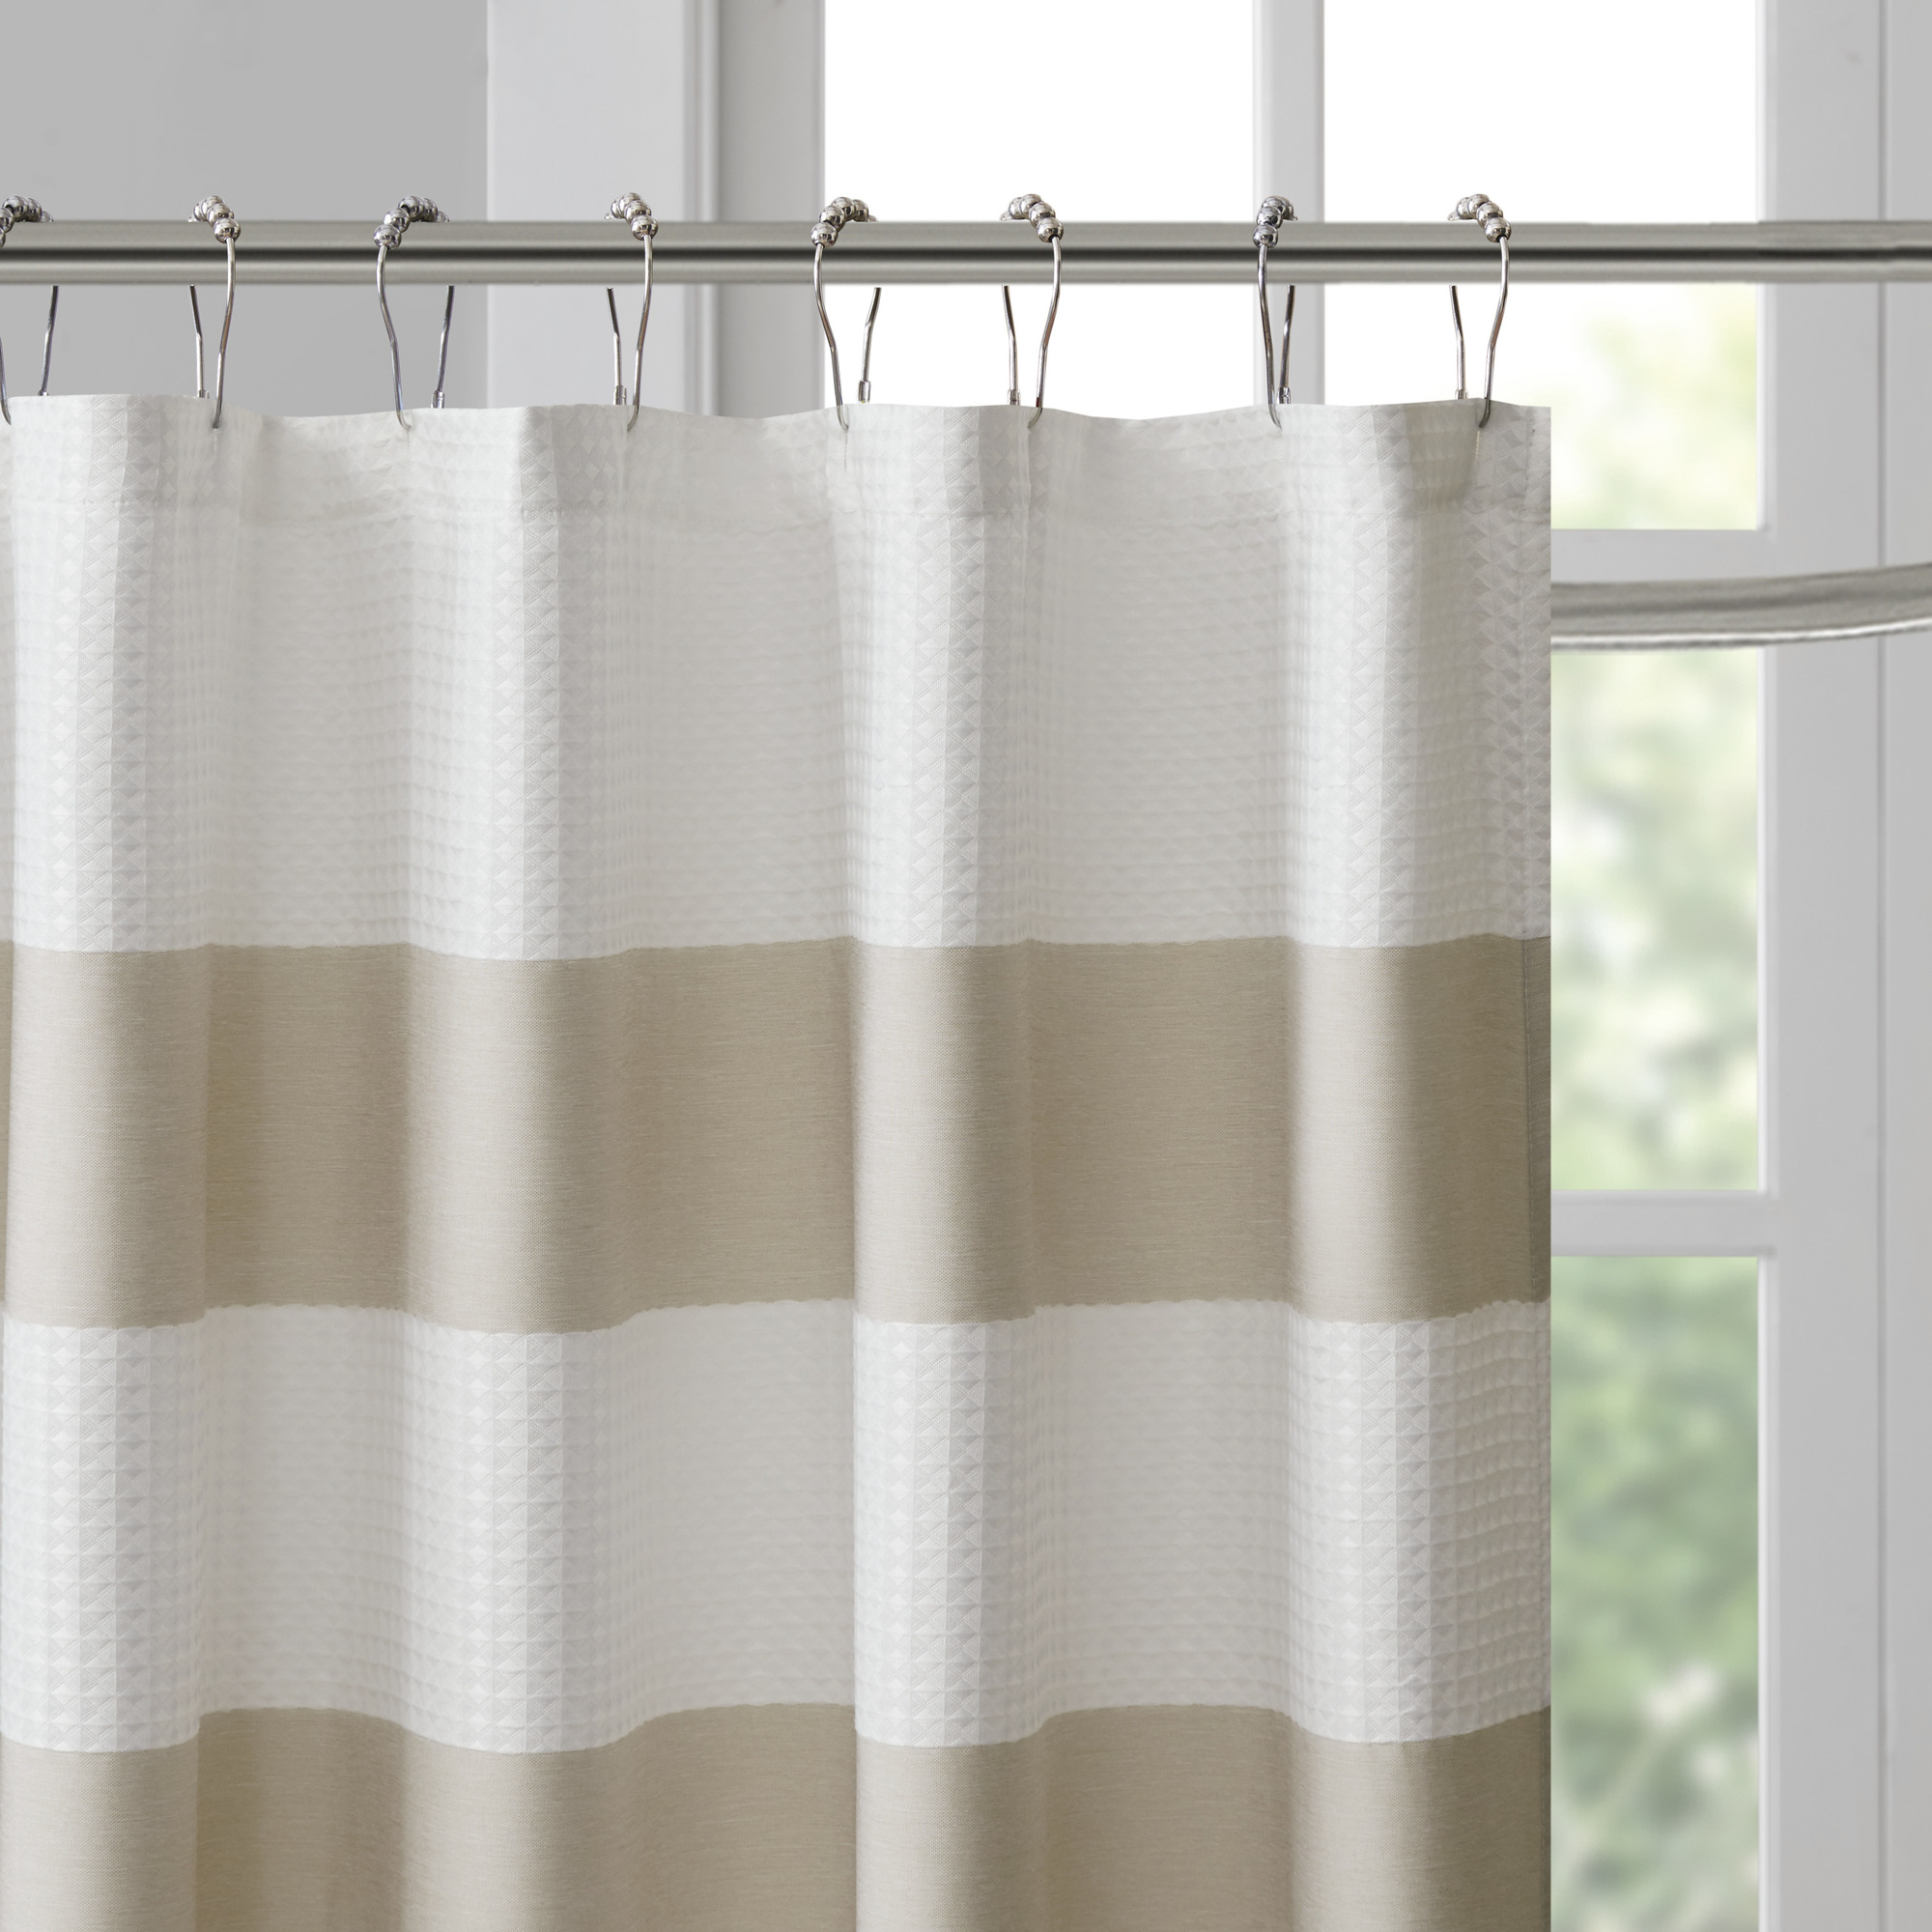 Home Essence Spa Waffle Shower Curtain with 3M Treatment, Taupe - image 3 of 4